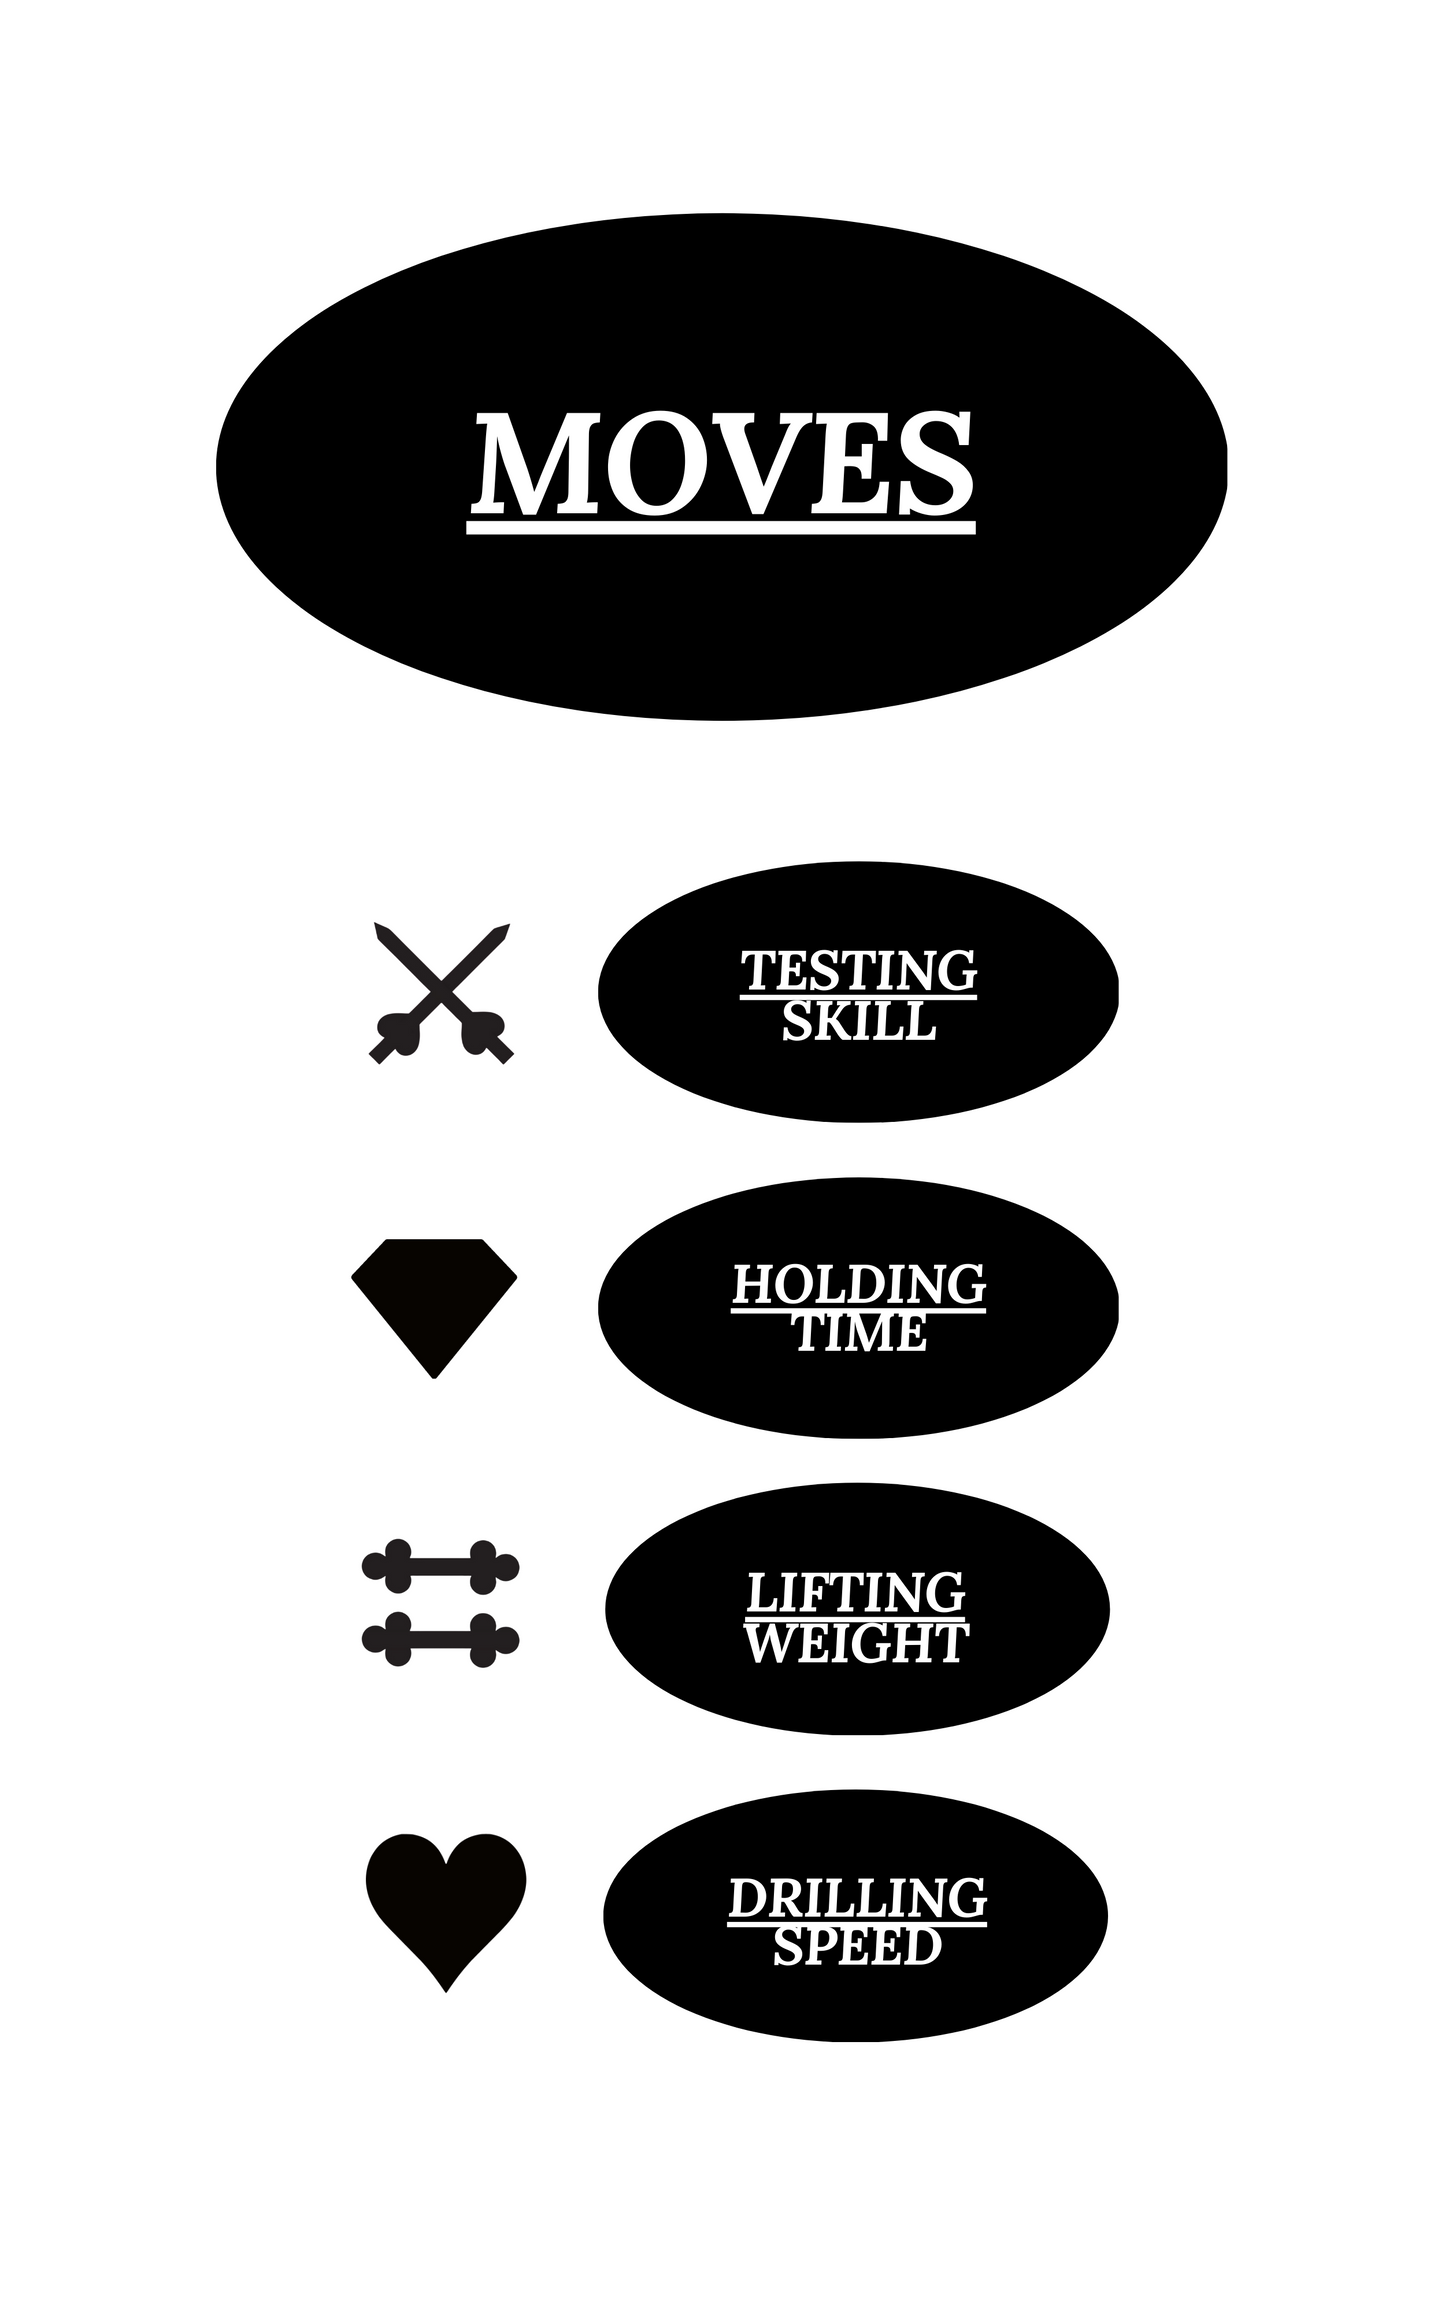 Booklet: MOVES